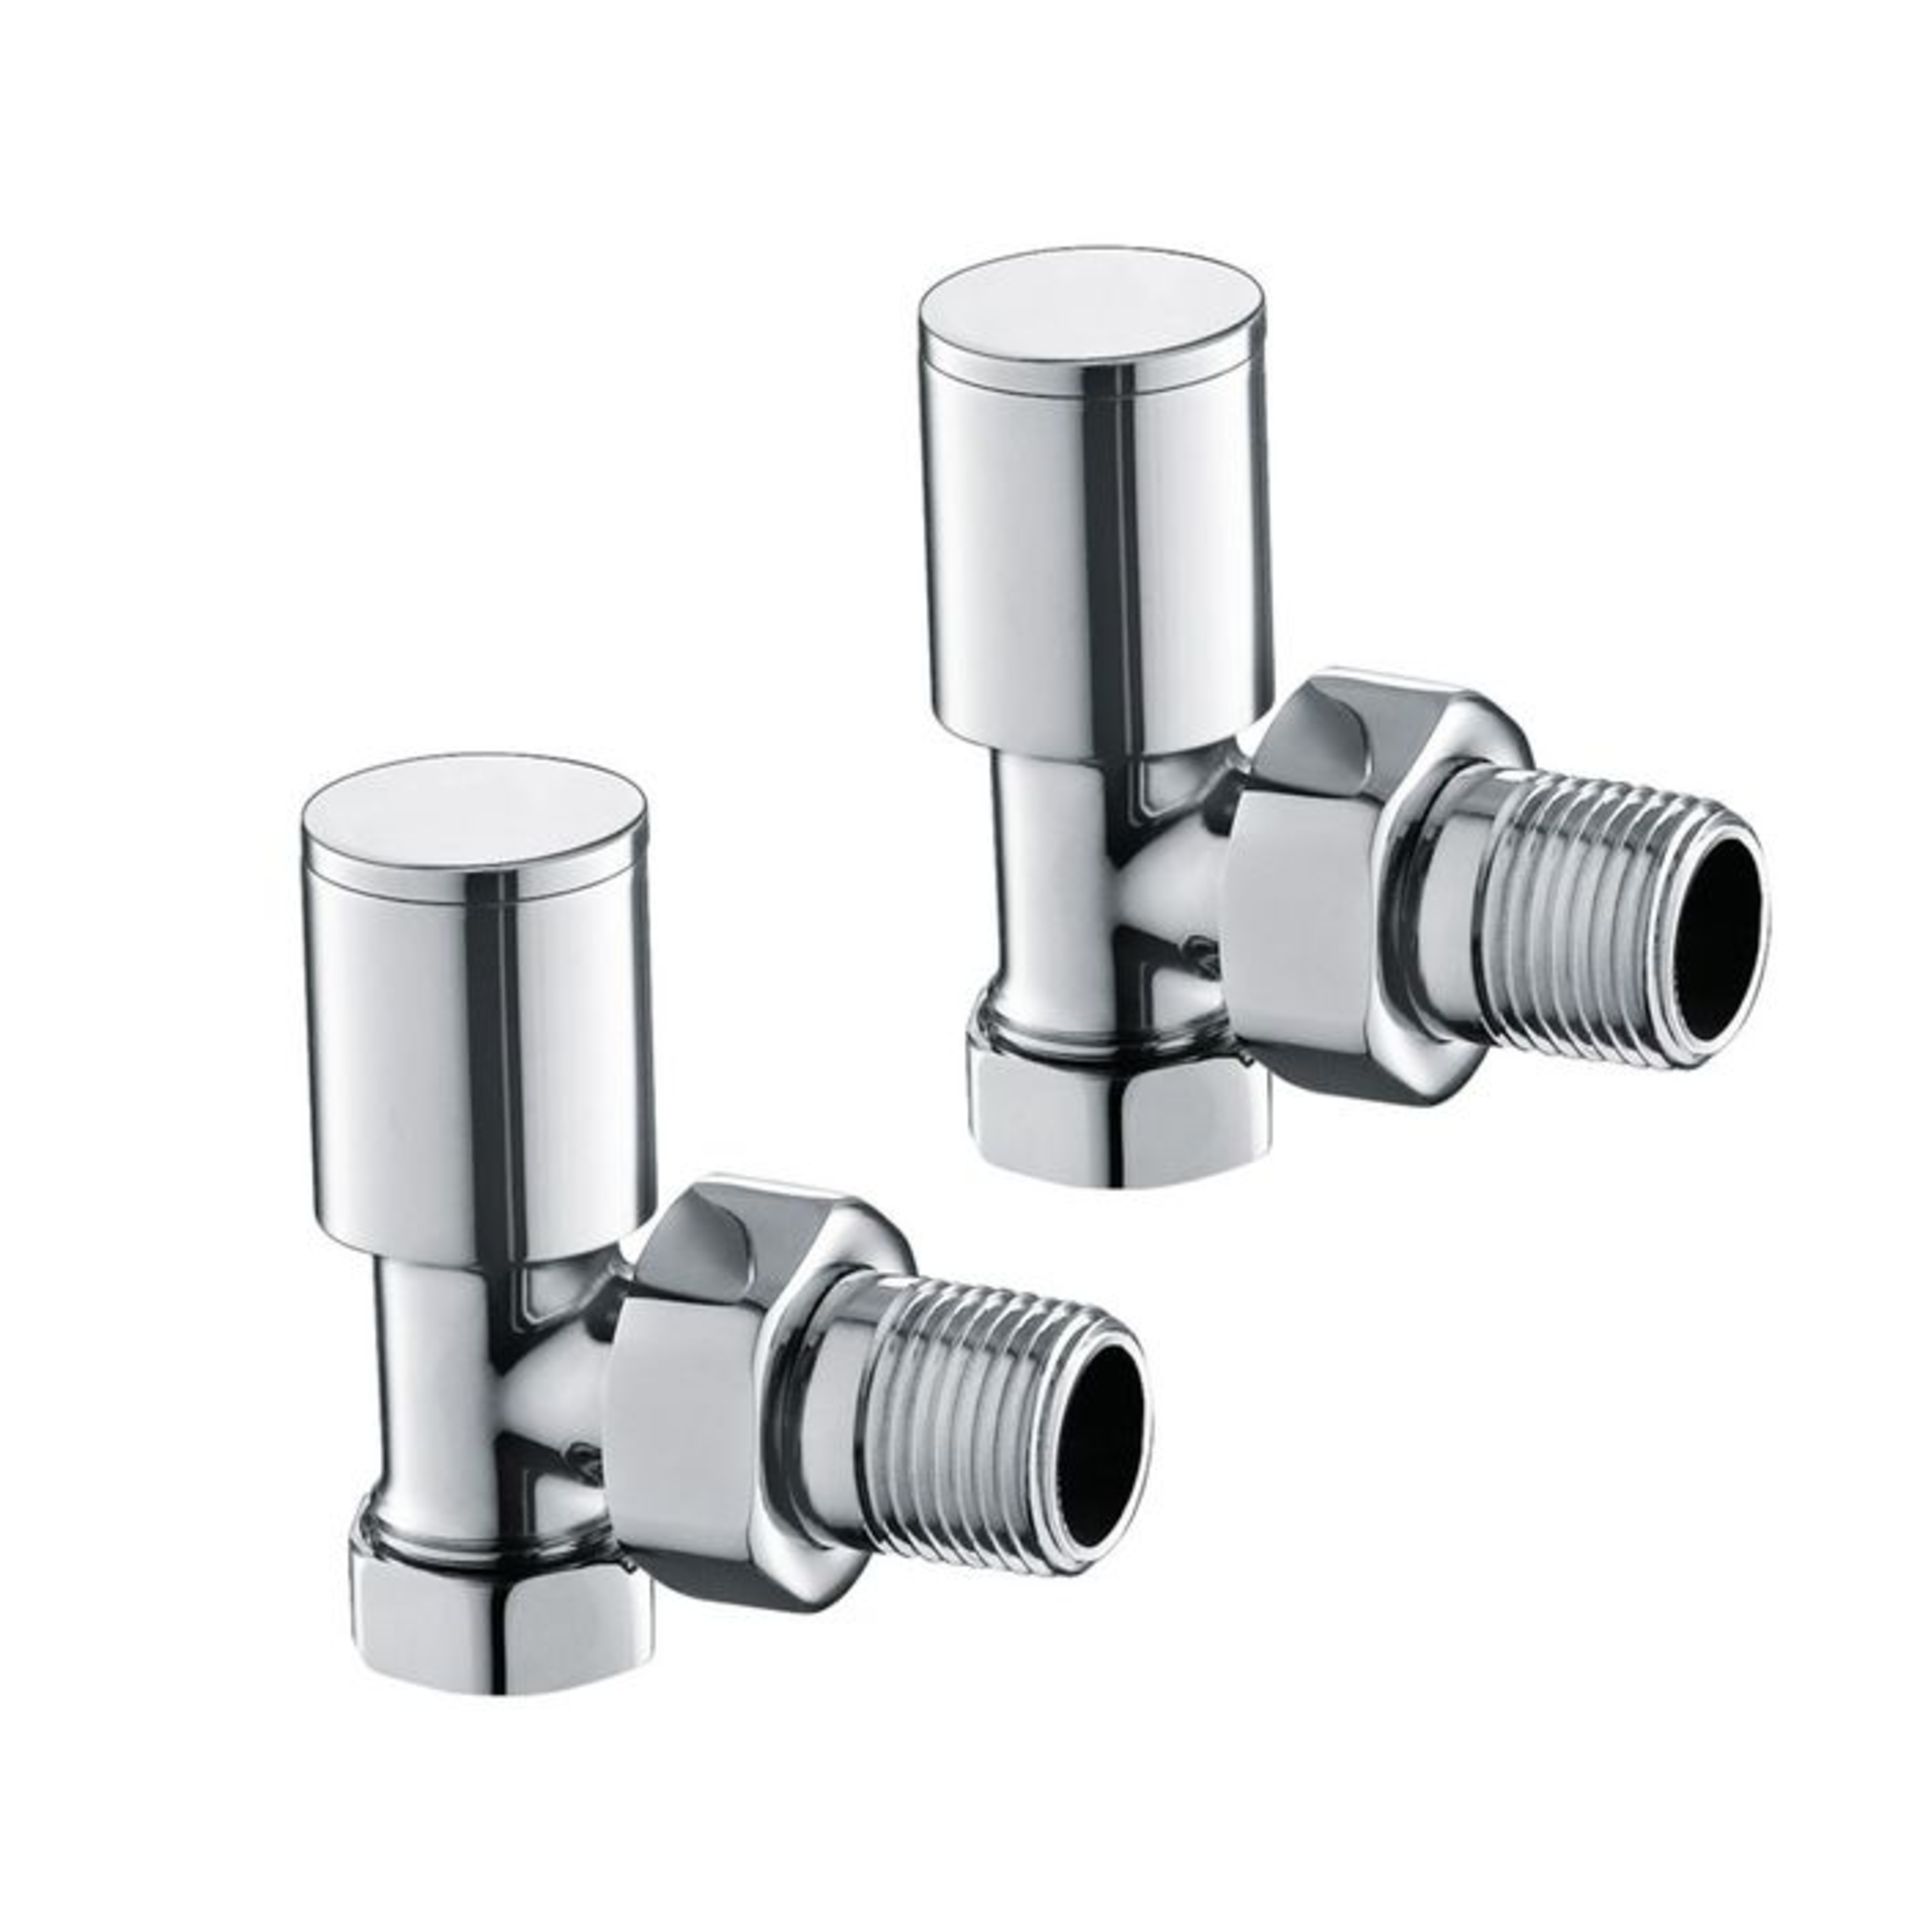 (AL105) 15mm Standard Connection Angled Radiator Valves - Heavy Duty Polished Chrome Plated Brass